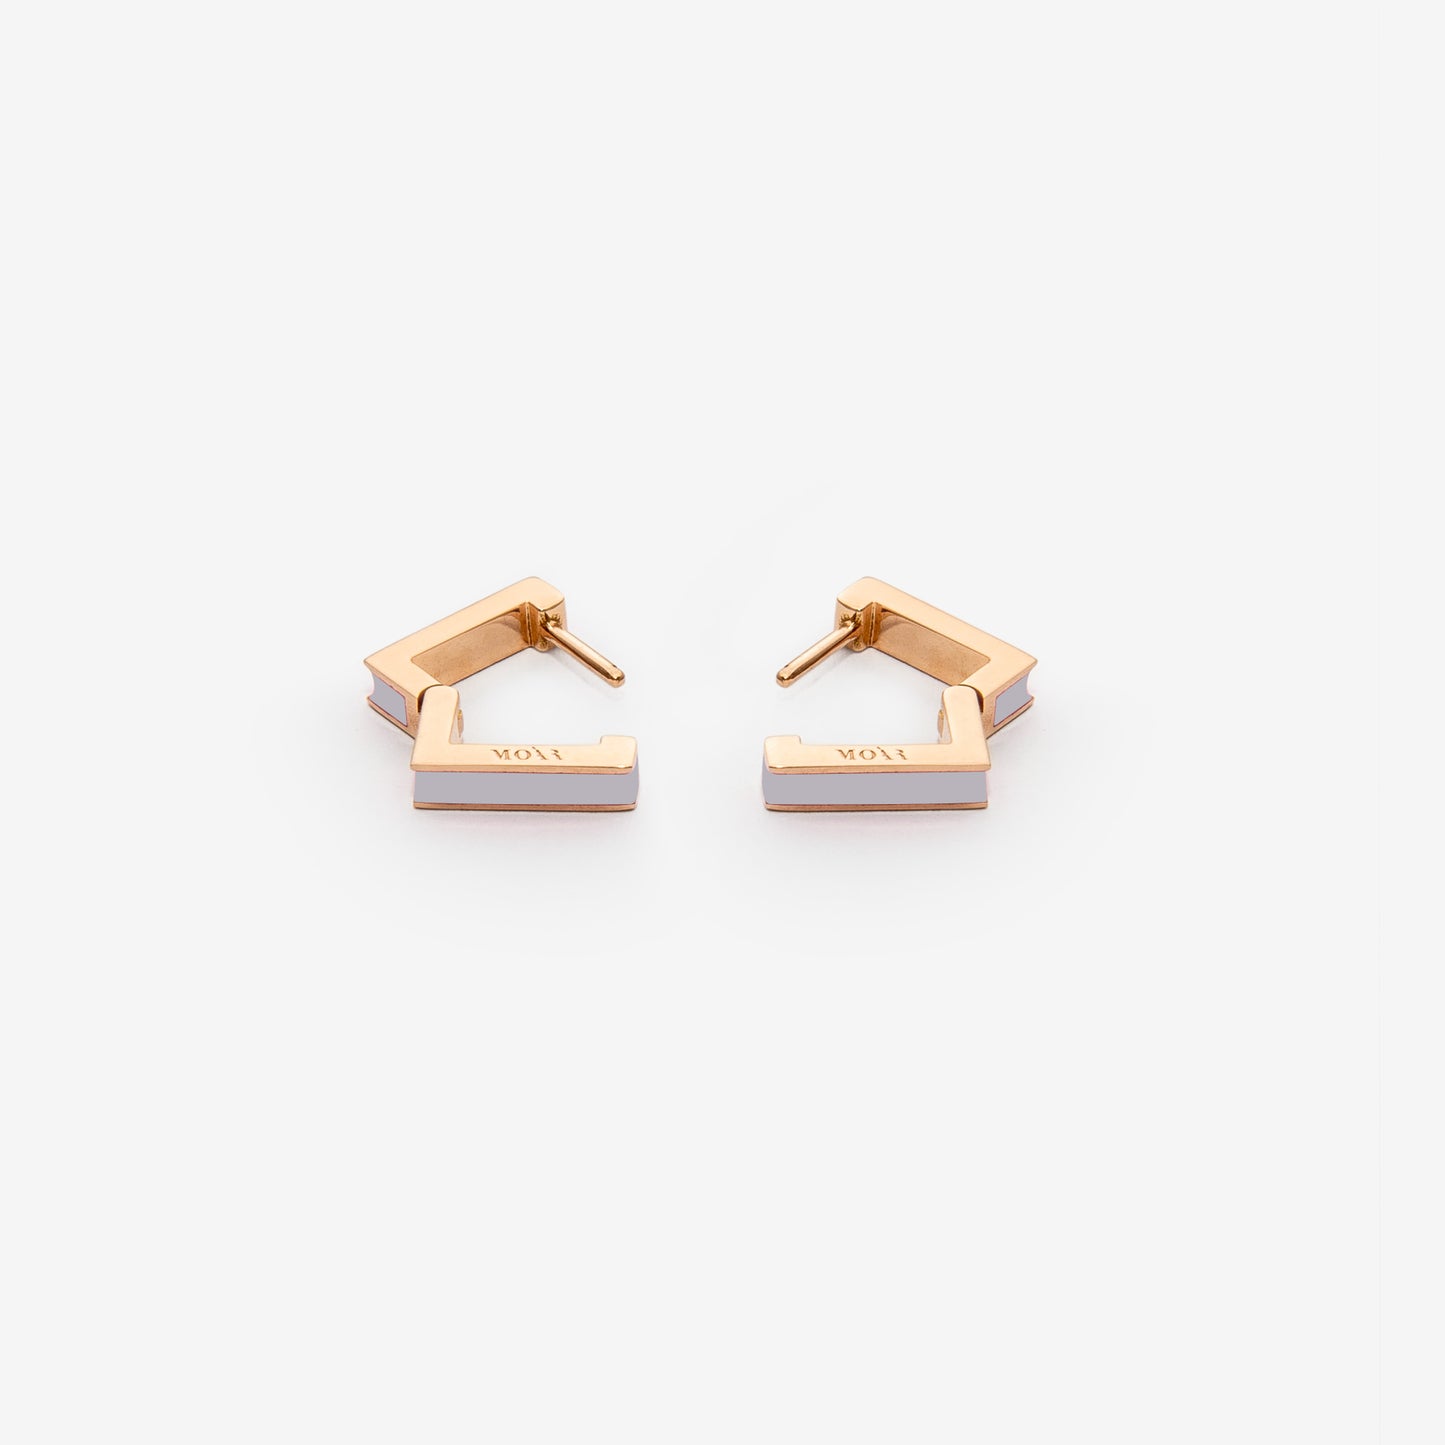 Square cool gray earrings